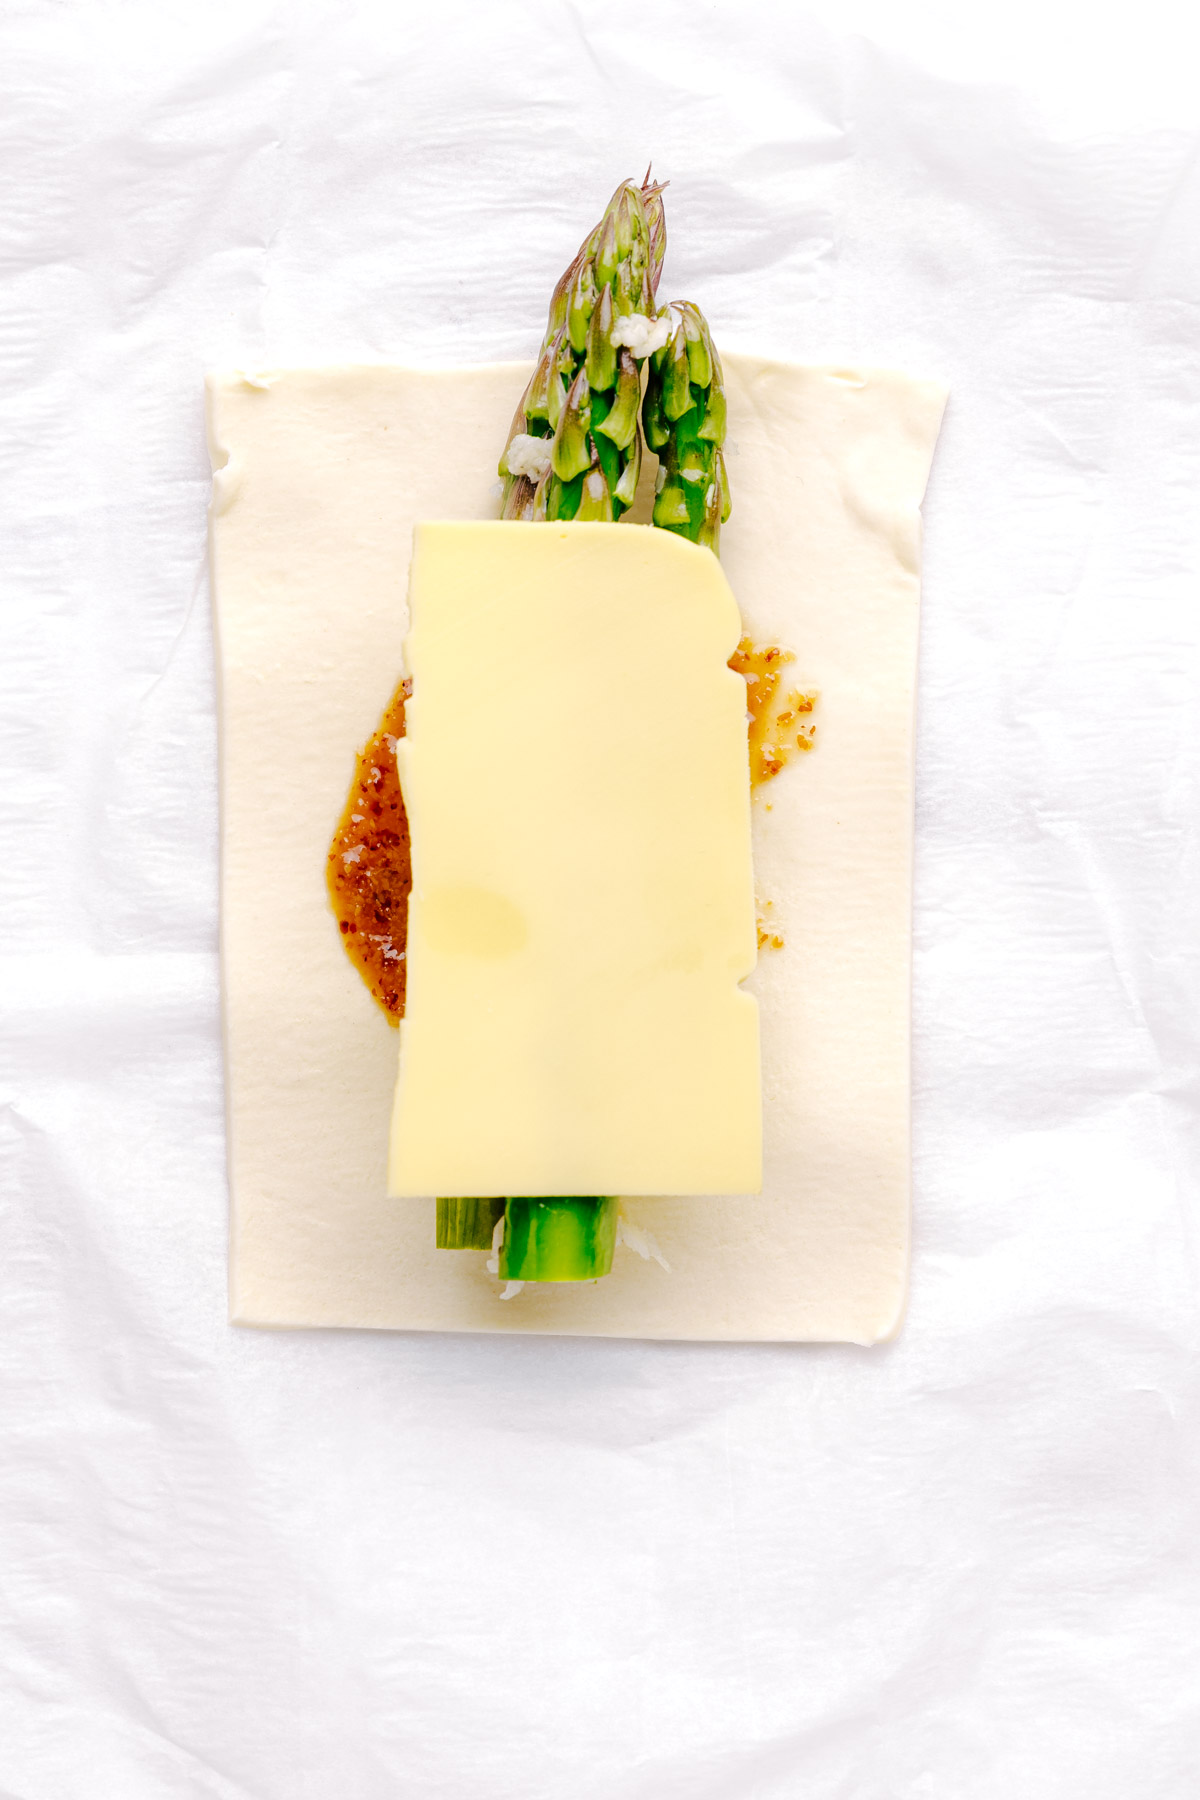 A square of puff pastry with a layer of mustard and maple syrup, three asparagus, and half a cheese slice in the middle on white parchment paper